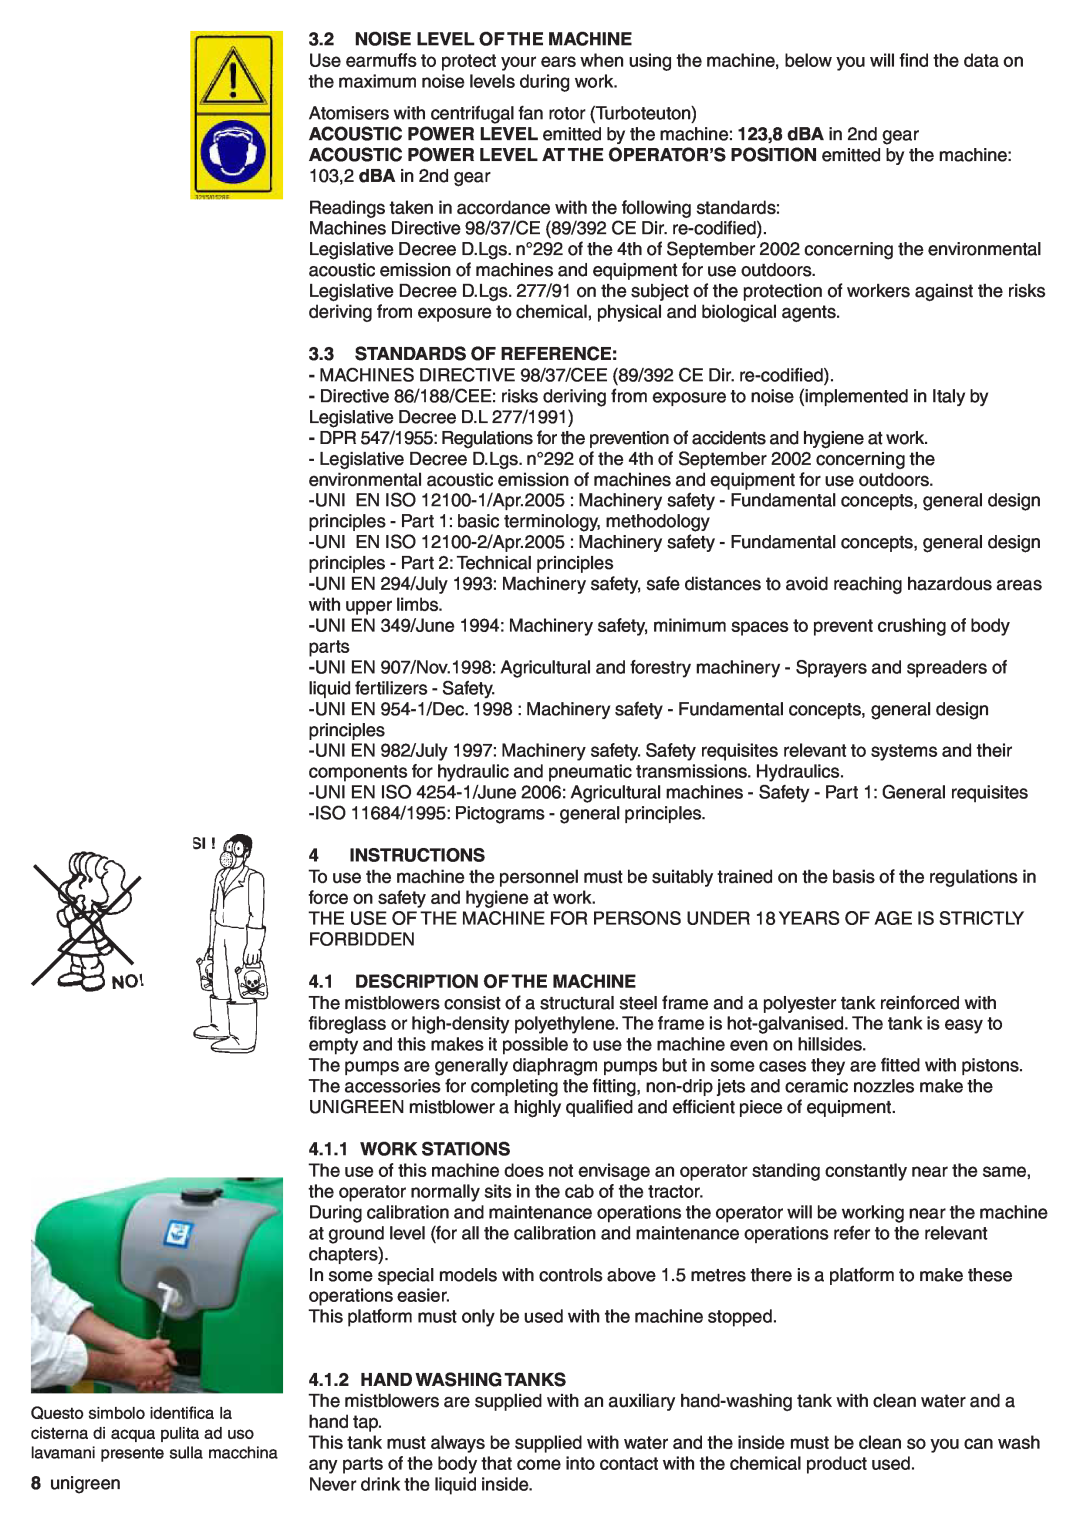 Unigreen P600 Noise Level Of The Machine, Standards Of Reference, Instructions, Description Of The Machine, Work Stations 